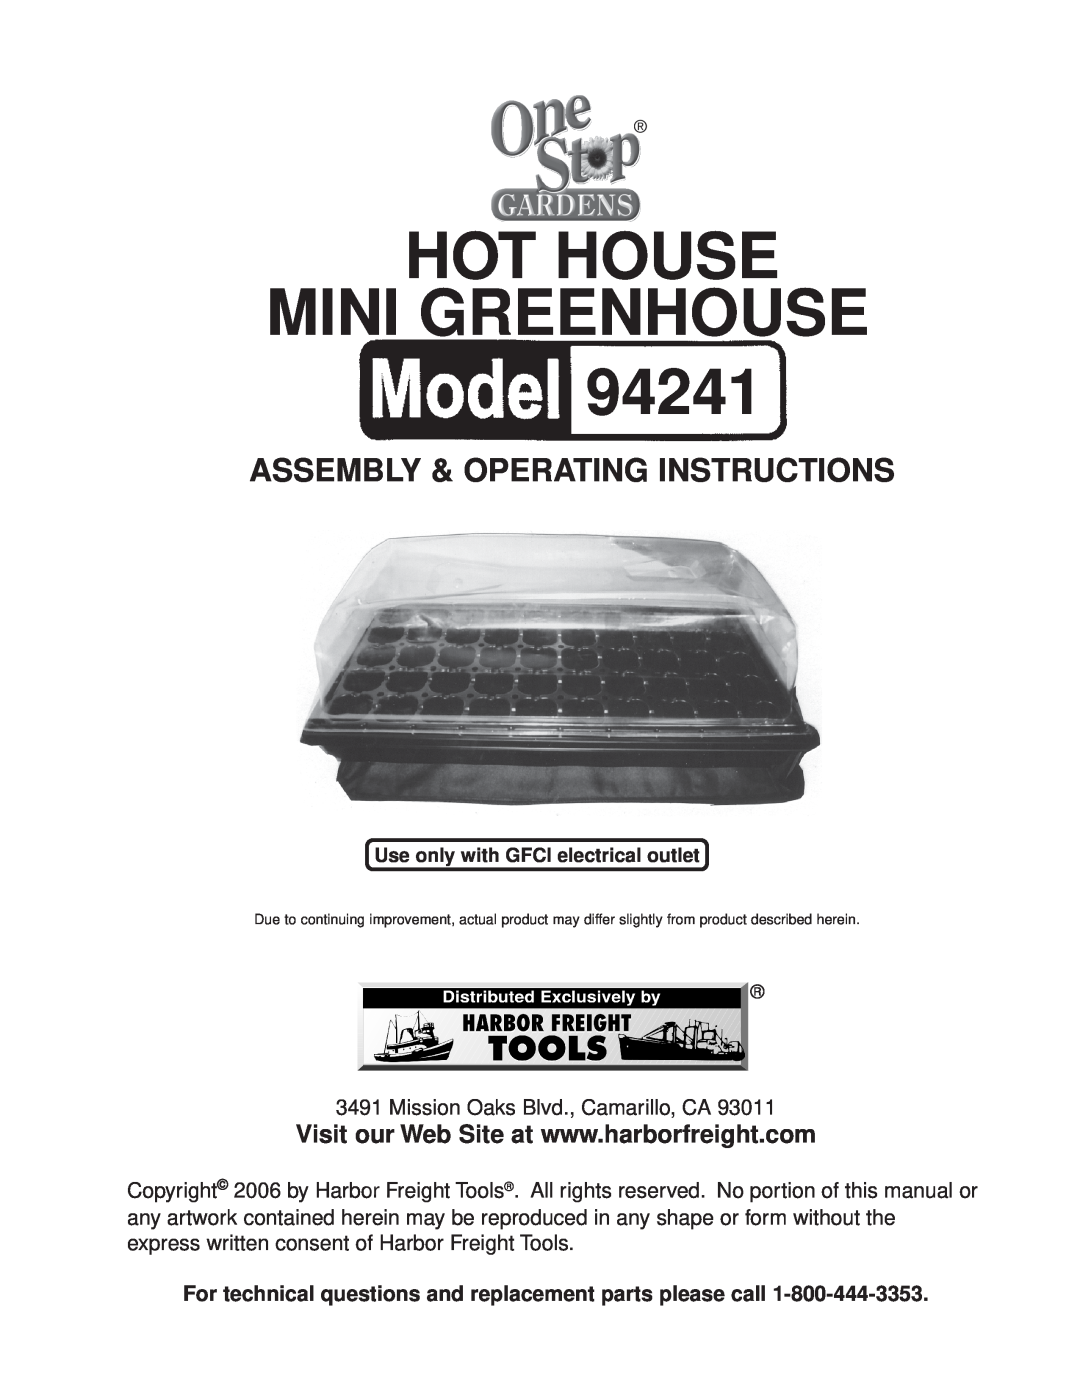 Harbor Freight Tools 94241 operating instructions Hot House Mini Greenhouse, Assembly & Operating Instructions 